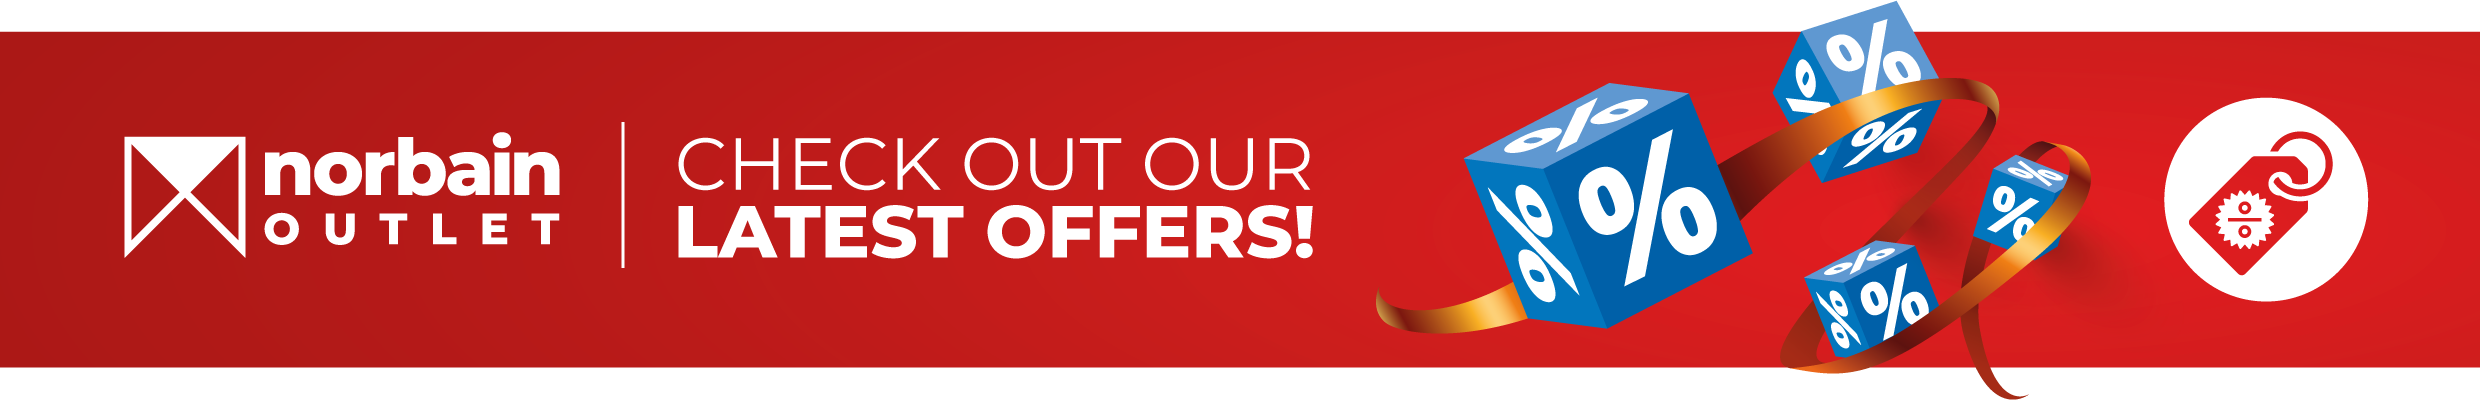 Norbain Outlet Banner - Save on our latest offers